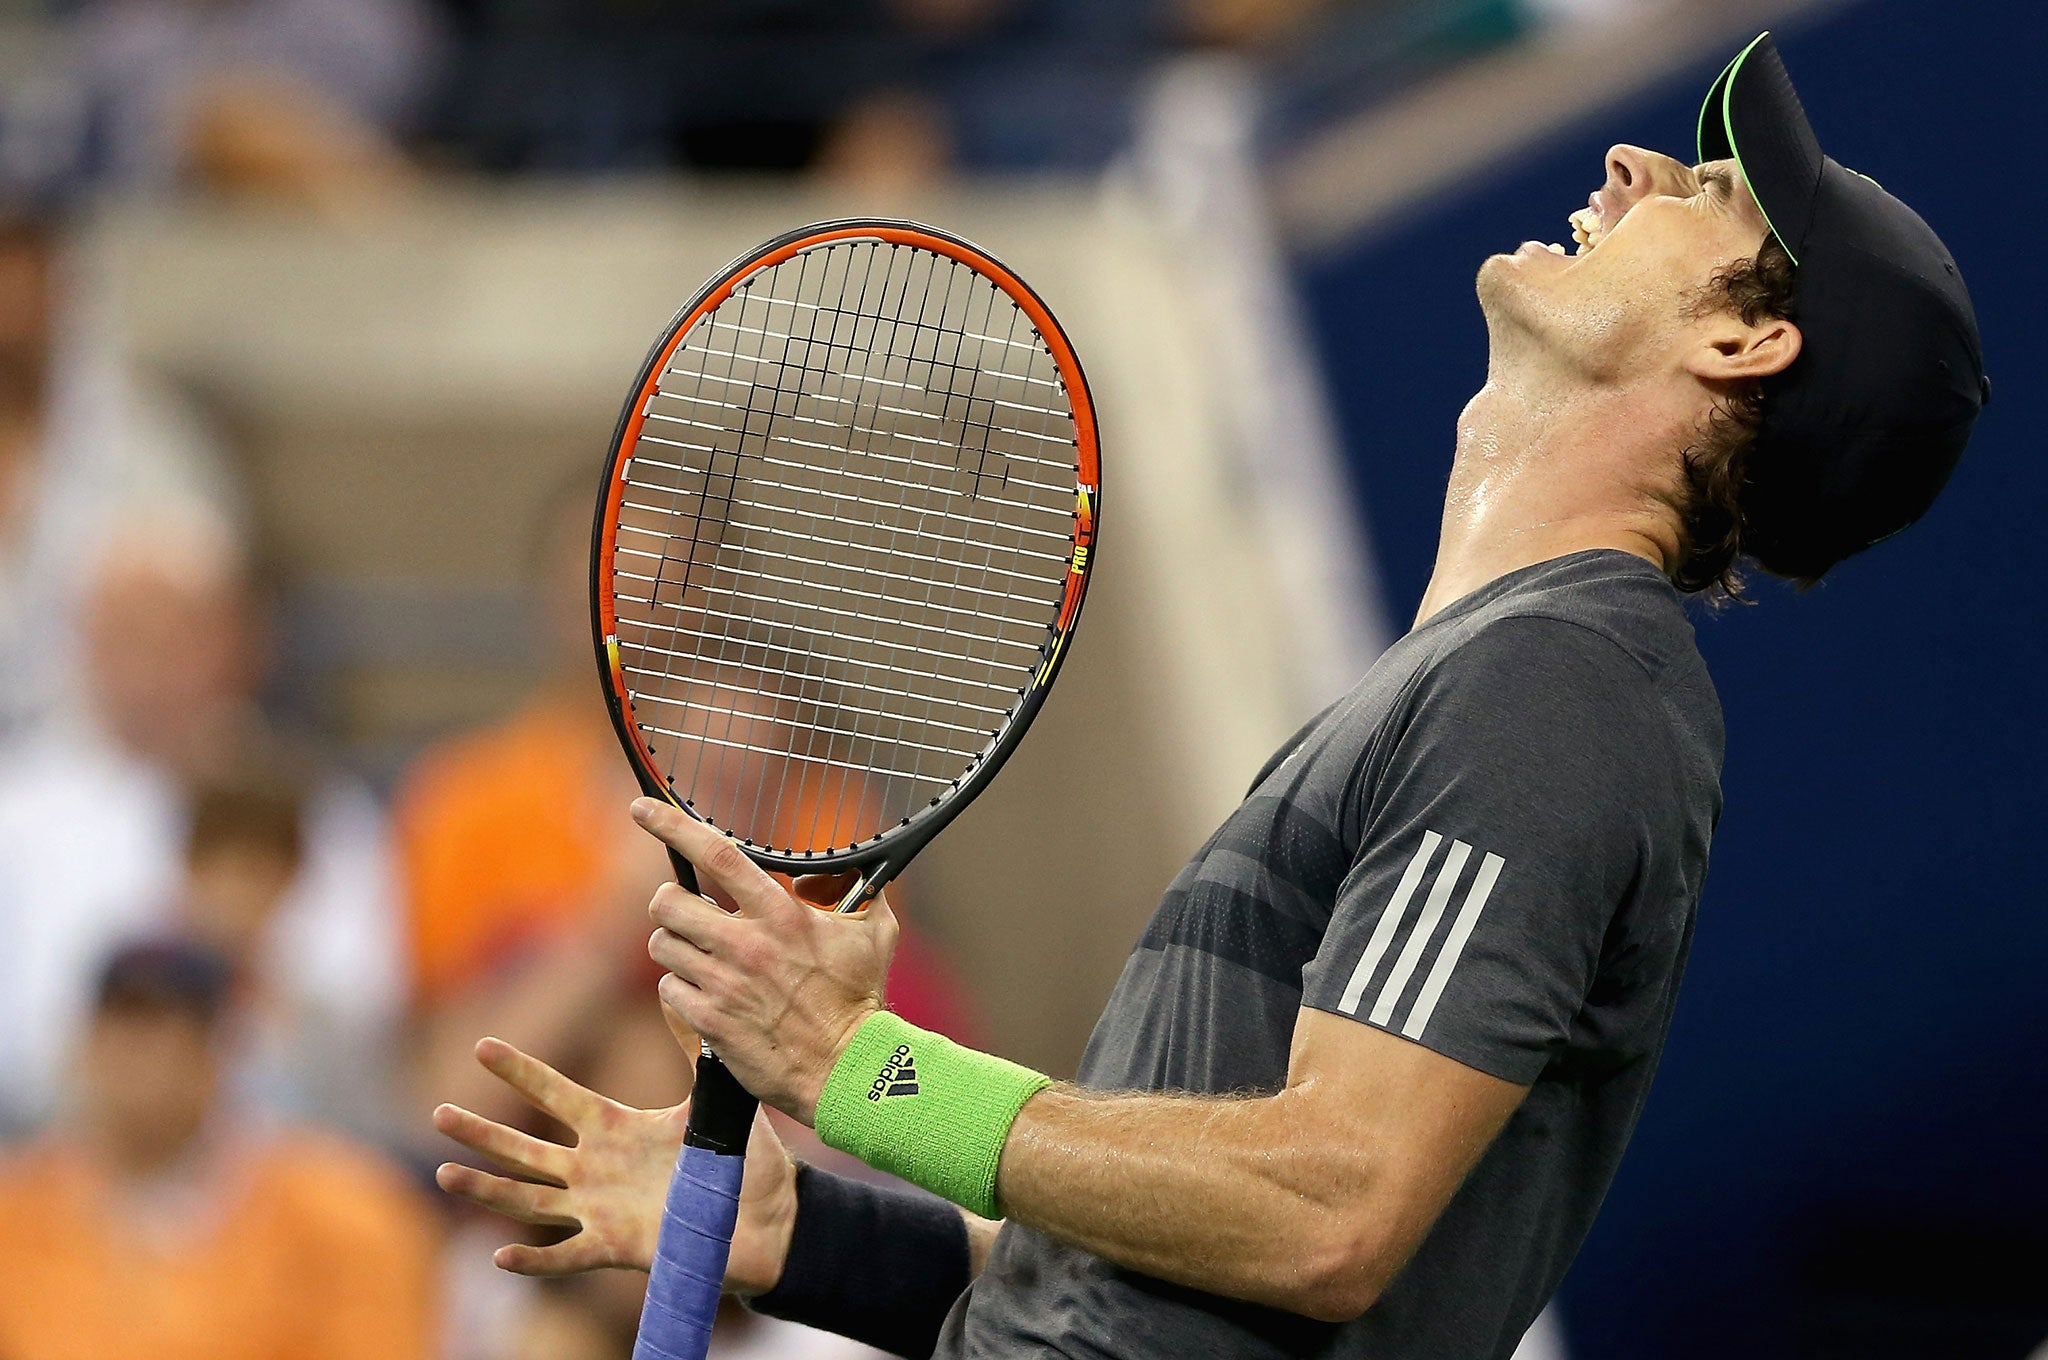 Andy Murray of Great Britain reacts against Novak Djokovic of Serbia during their men's singles quarterfinal match on Day Ten of the 2014 US Open